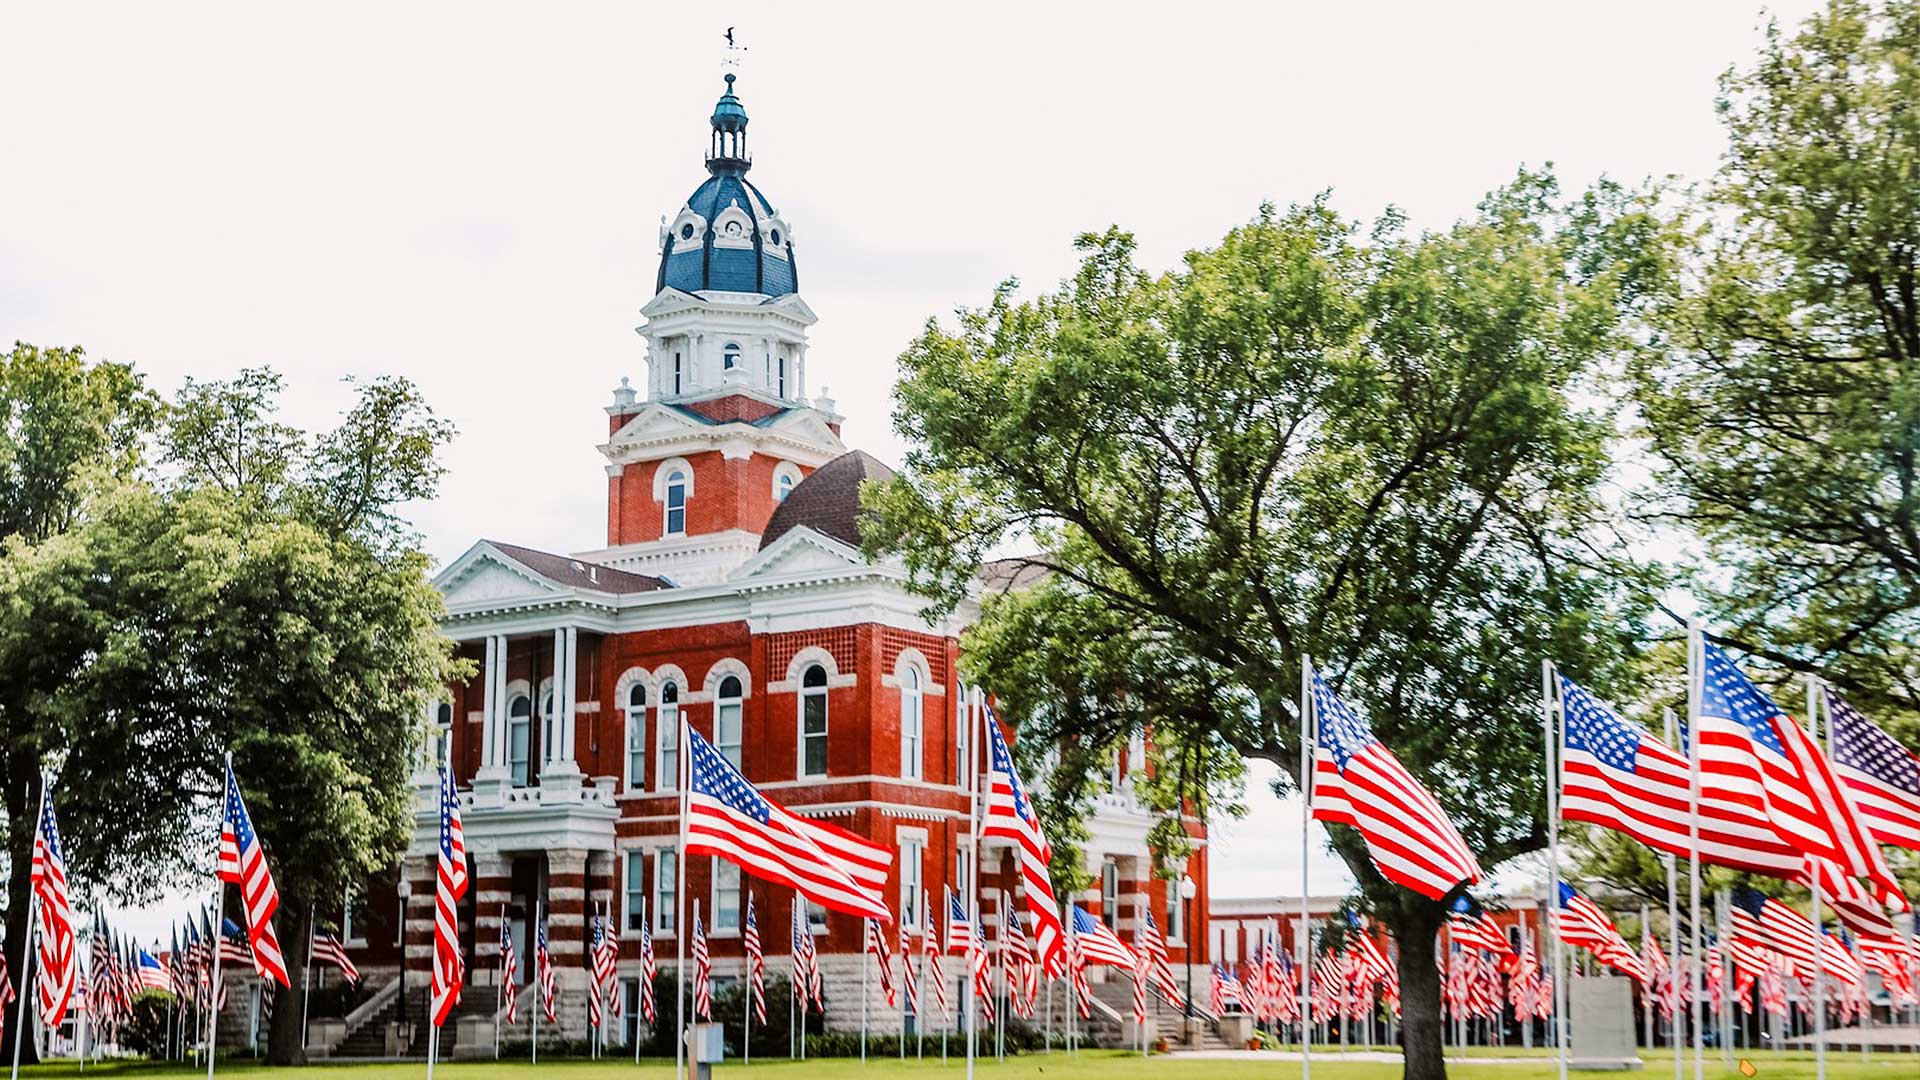 Homepage Slide 1 - Courthouse and Flags 4.jpg